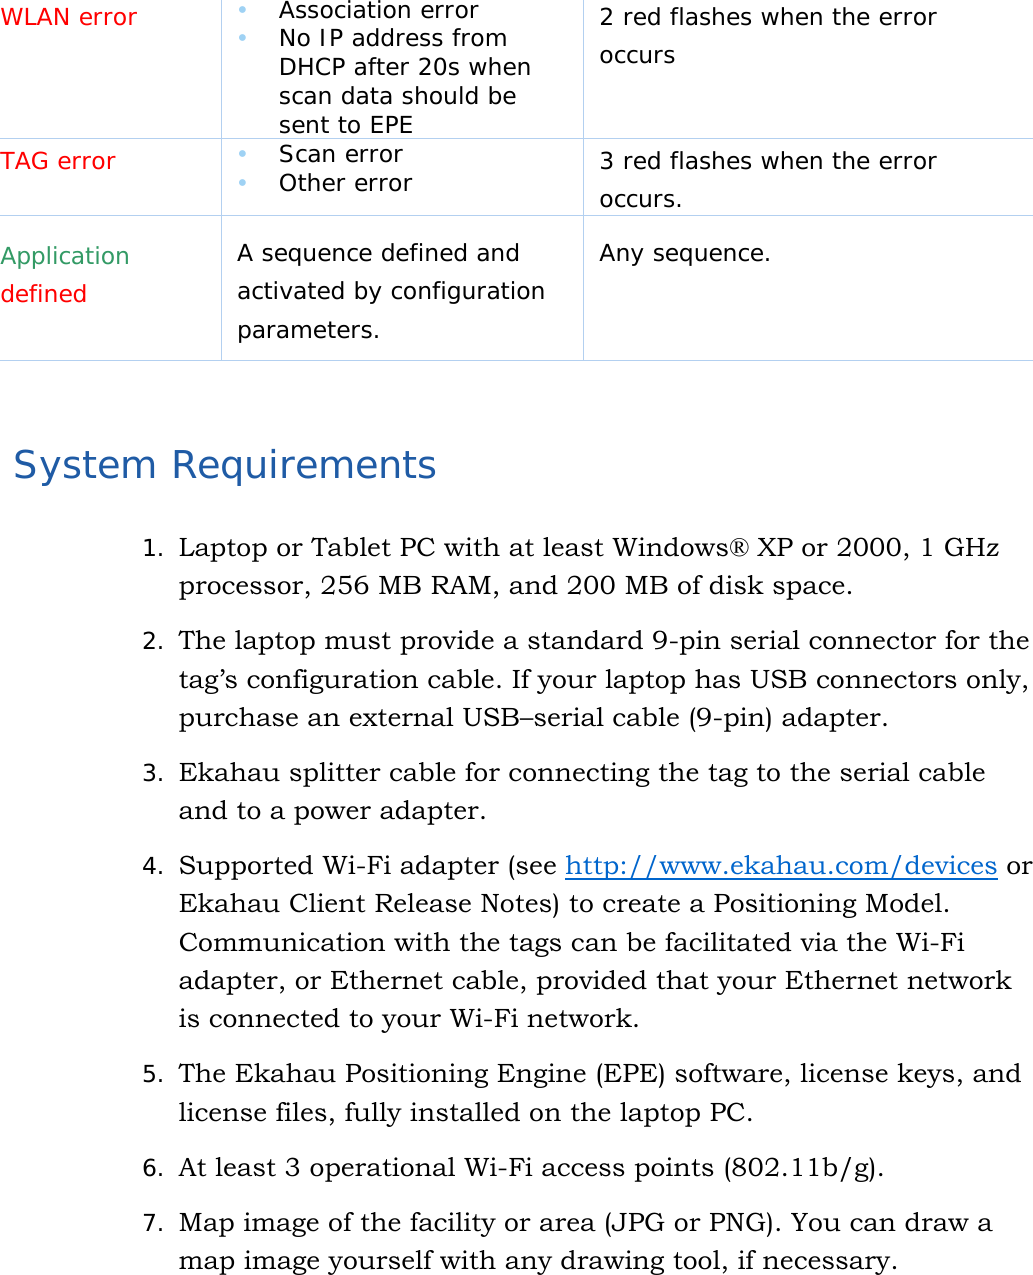   6 WLAN error    Association error   No IP address from DHCP after 20s when scan data should be sent to EPE 2 red flashes when the error occurs TAG error    Scan error   Other error  3 red flashes when the error occurs. Application defined A sequence defined and activated by configuration parameters. Any sequence.   System Requirements 1. Laptop or Tablet PC with at least Windows® XP or 2000, 1 GHz processor, 256 MB RAM, and 200 MB of disk space. 2. The laptop must provide a standard 9-pin serial connector for the tag’s configuration cable. If your laptop has USB connectors only, purchase an external USB–serial cable (9-pin) adapter. 3. Ekahau splitter cable for connecting the tag to the serial cable and to a power adapter. 4. Supported Wi-Fi adapter (see http://www.ekahau.com/devices or Ekahau Client Release Notes) to create a Positioning Model. Communication with the tags can be facilitated via the Wi-Fi adapter, or Ethernet cable, provided that your Ethernet network is connected to your Wi-Fi network. 5. The Ekahau Positioning Engine (EPE) software, license keys, and license files, fully installed on the laptop PC. 6. At least 3 operational Wi-Fi access points (802.11b/g). 7. Map image of the facility or area (JPG or PNG). You can draw a map image yourself with any drawing tool, if necessary.  